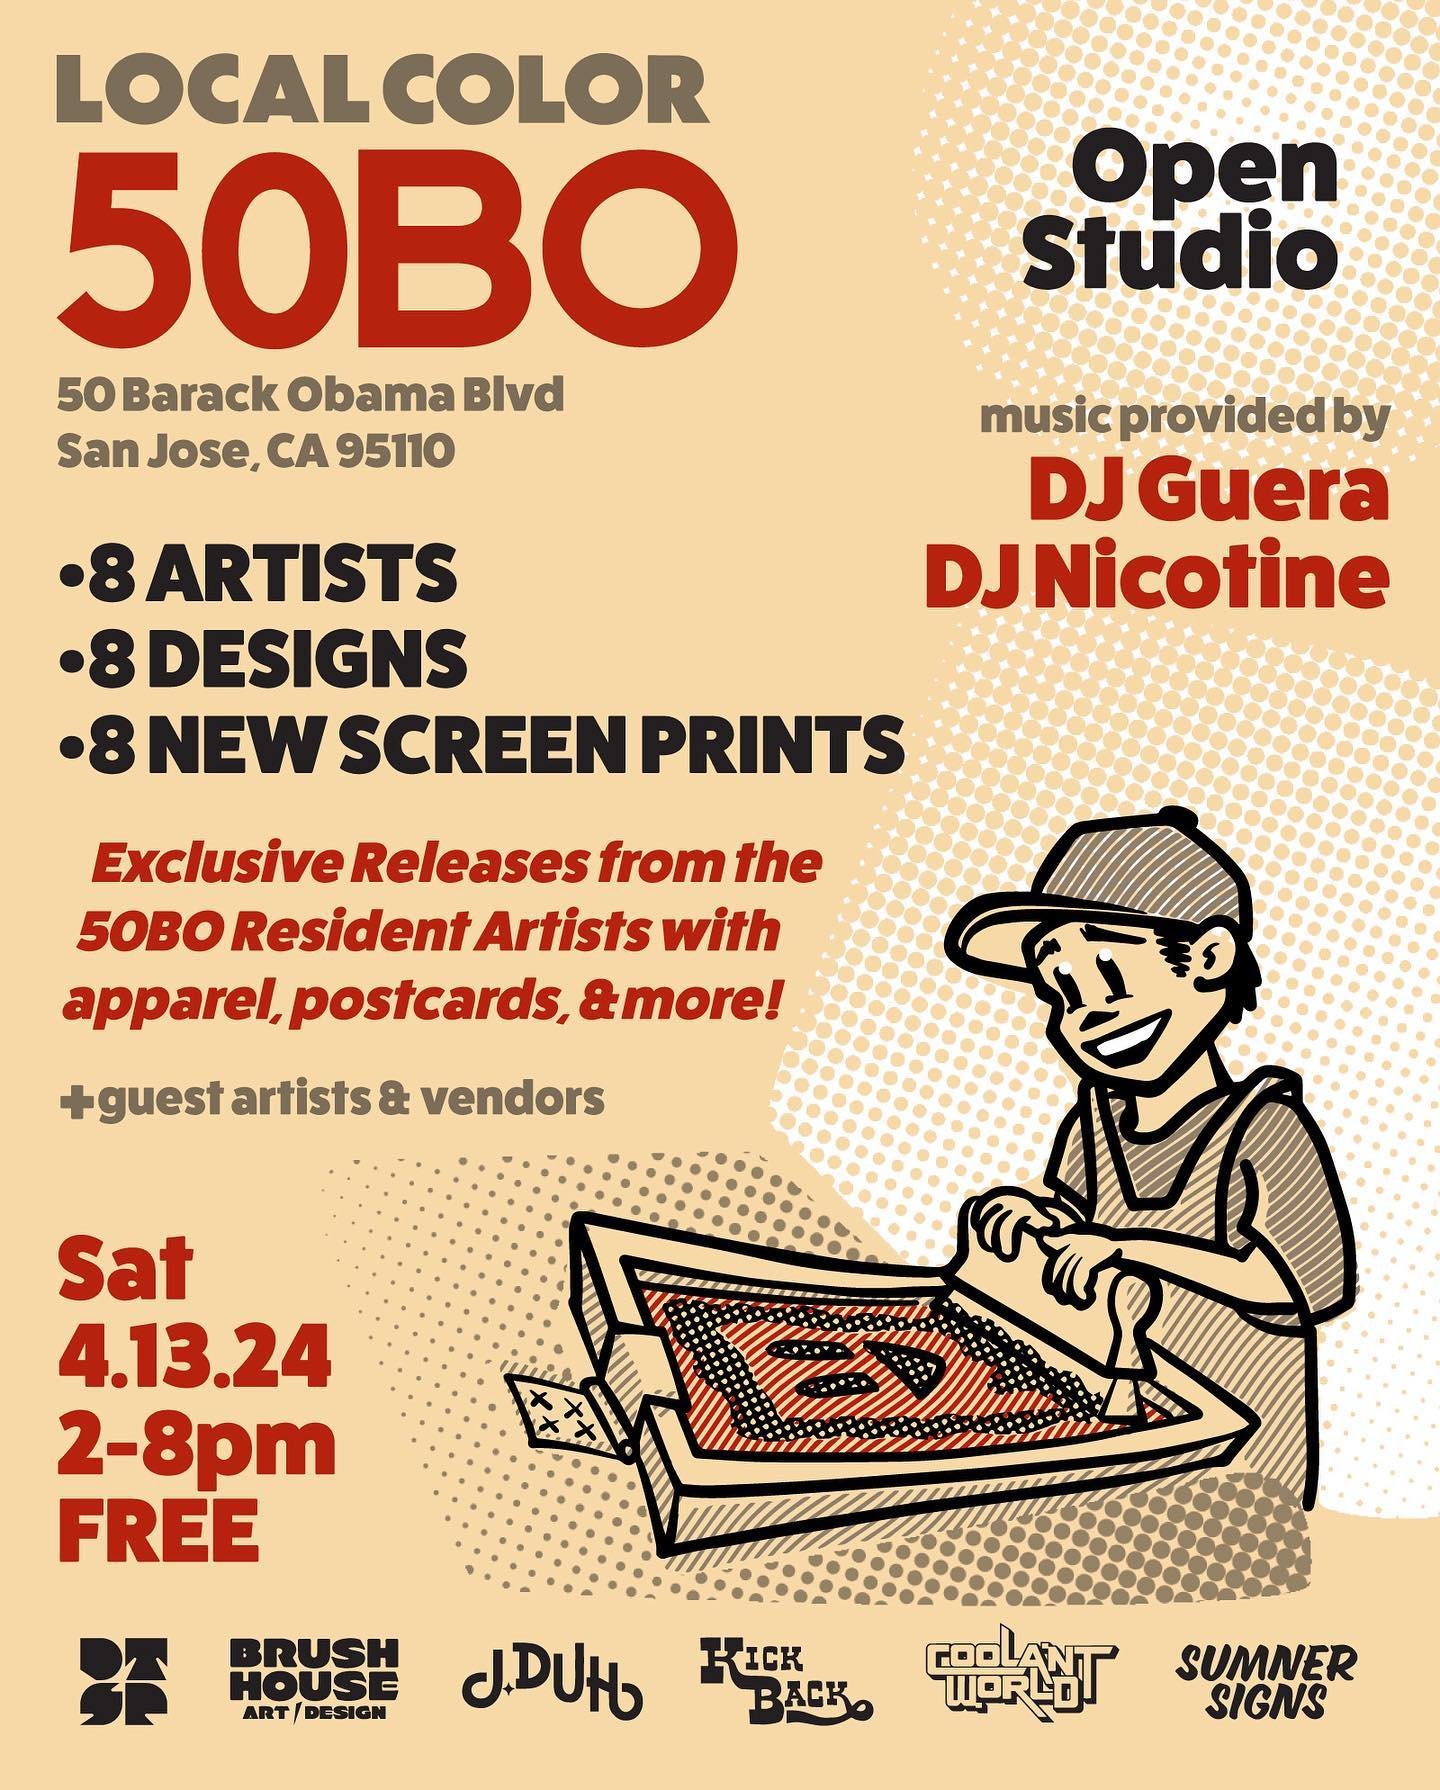 This weekend, meet us at 50BO!

Our resident artists will be sharing exclusive releases, plus more from vendors and guest artists. Afternoon soundtrack provided by Guera and DJ Nicotine.

Stop by and soak up the creativity!